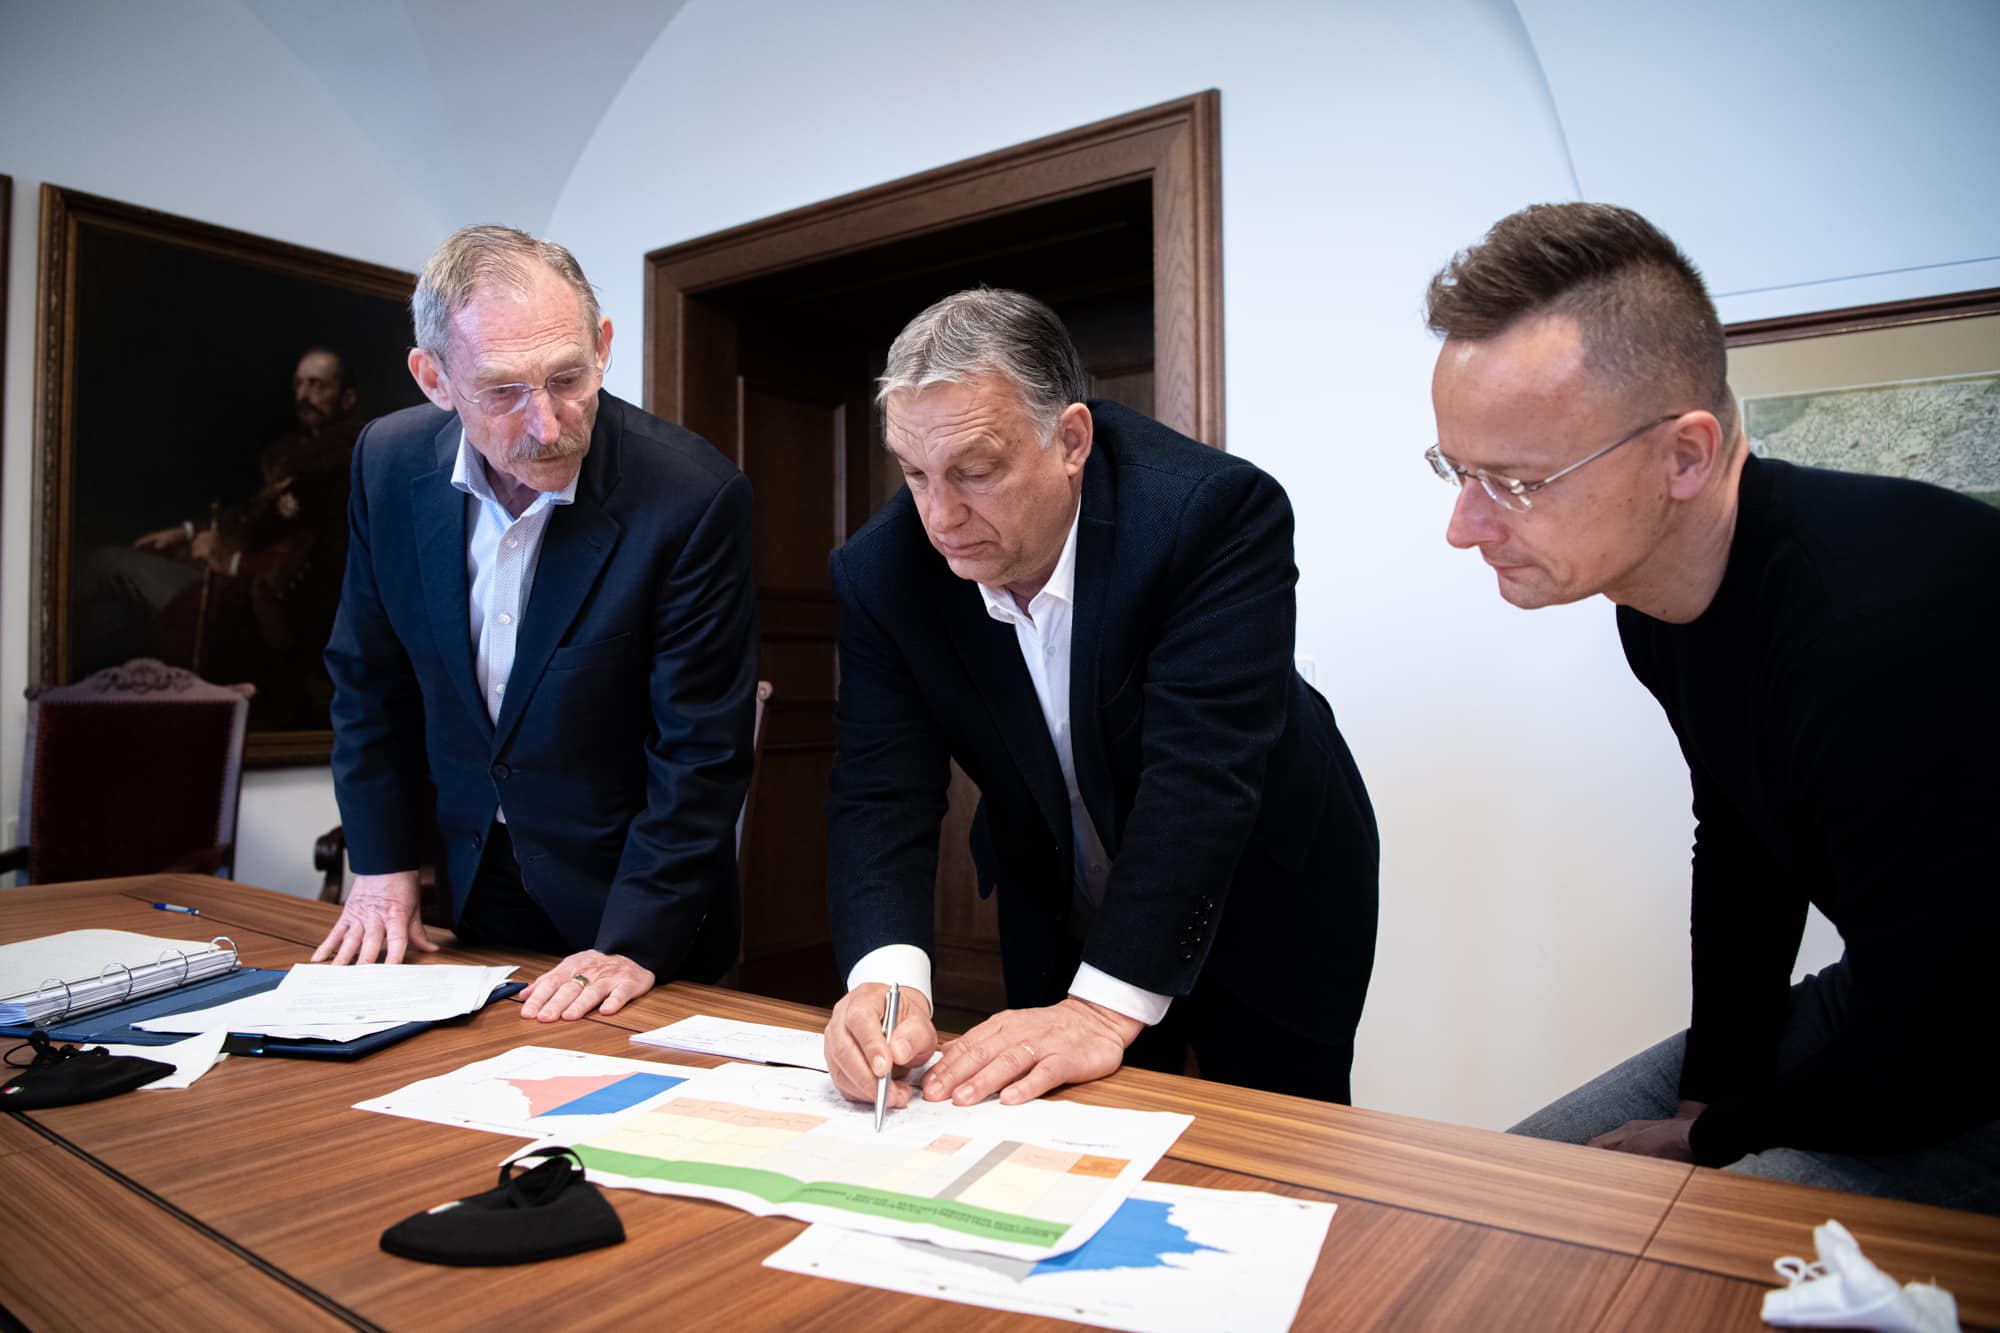 Next Goal At 5 M Vaccinated Against Covid-19 Set By PM Orbán